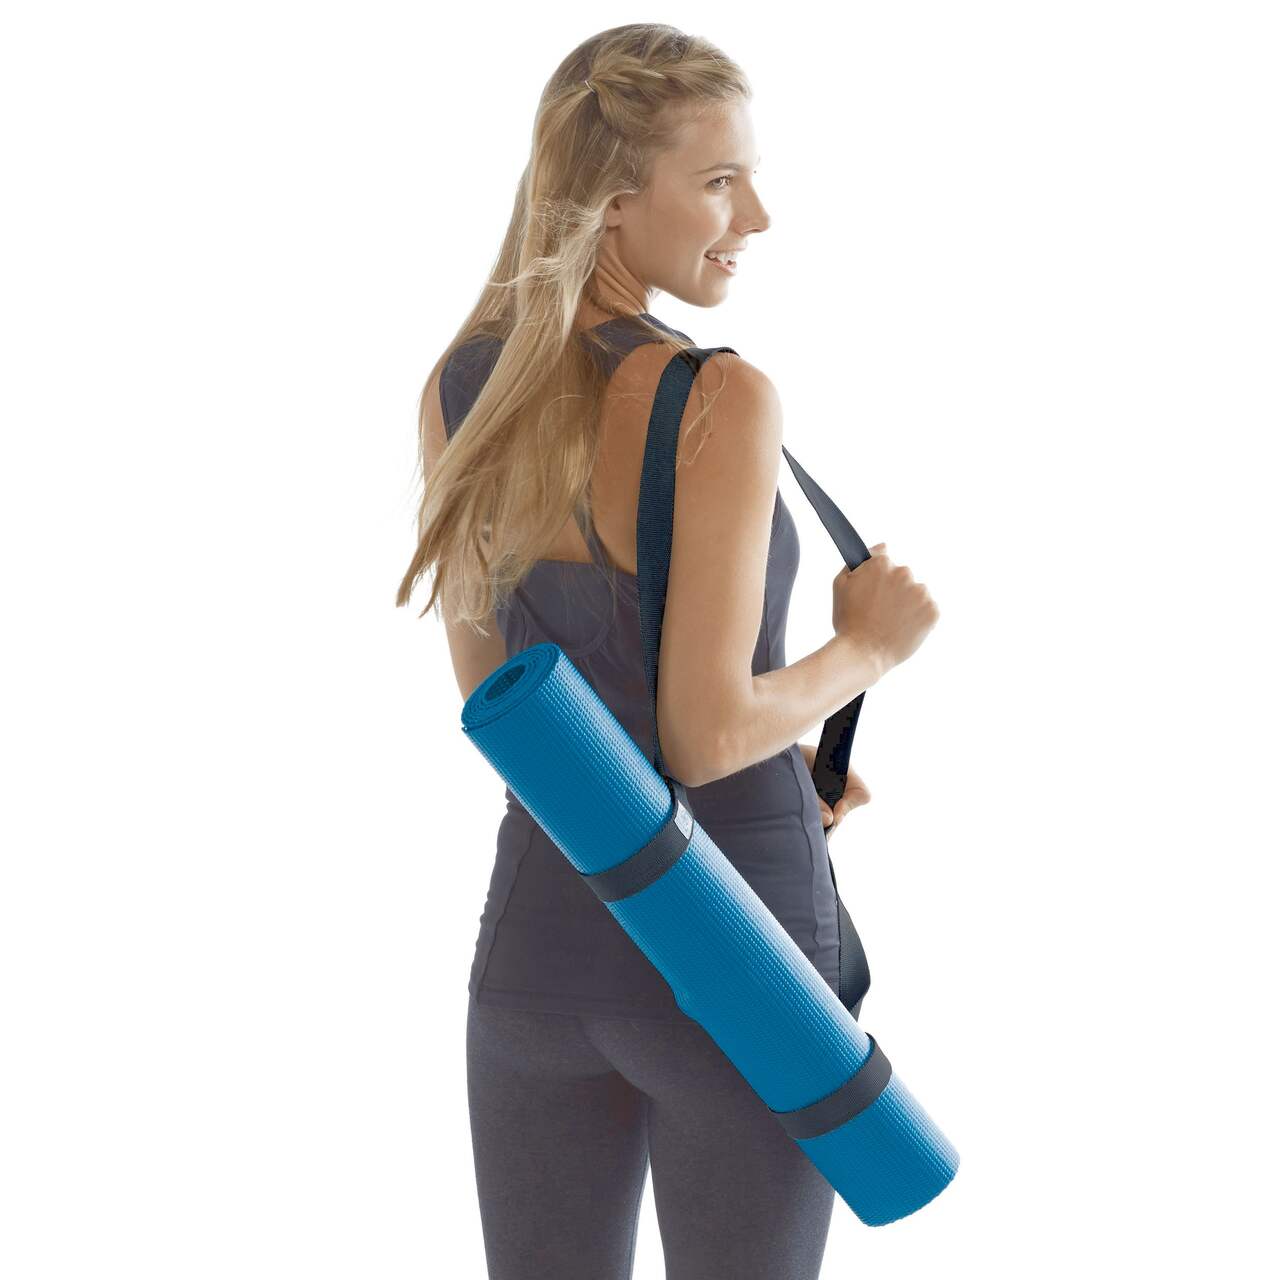 Gaiam Yoga Mat Sling Easy Cinch Hands-Free Teal/Blue Brand NEW